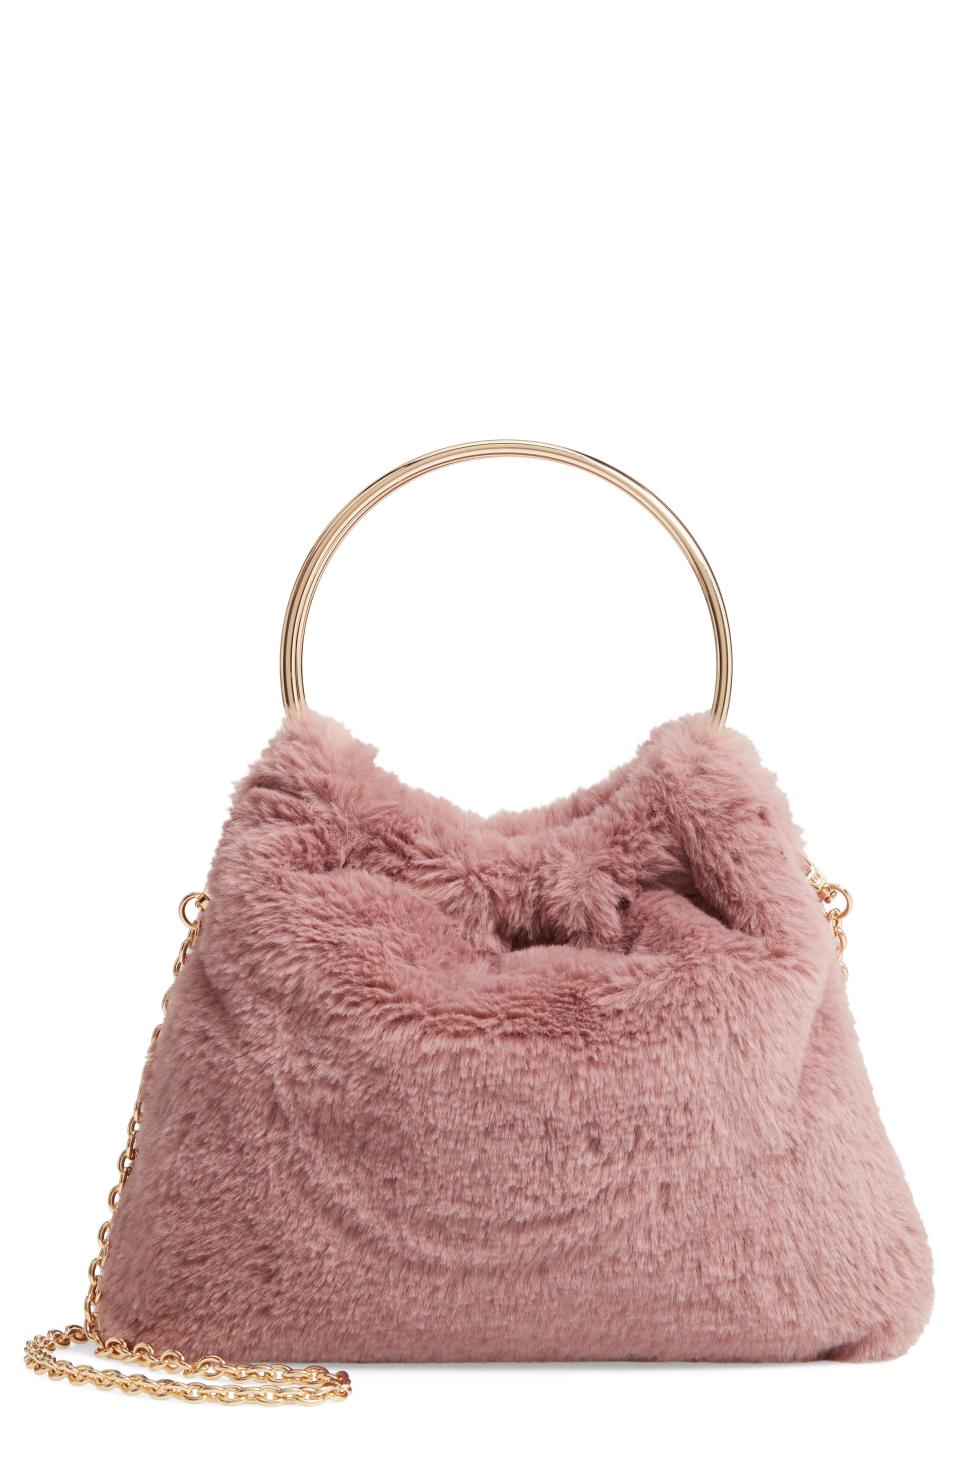 20) A Furry Bag That Will Go With Your Teddy Coat